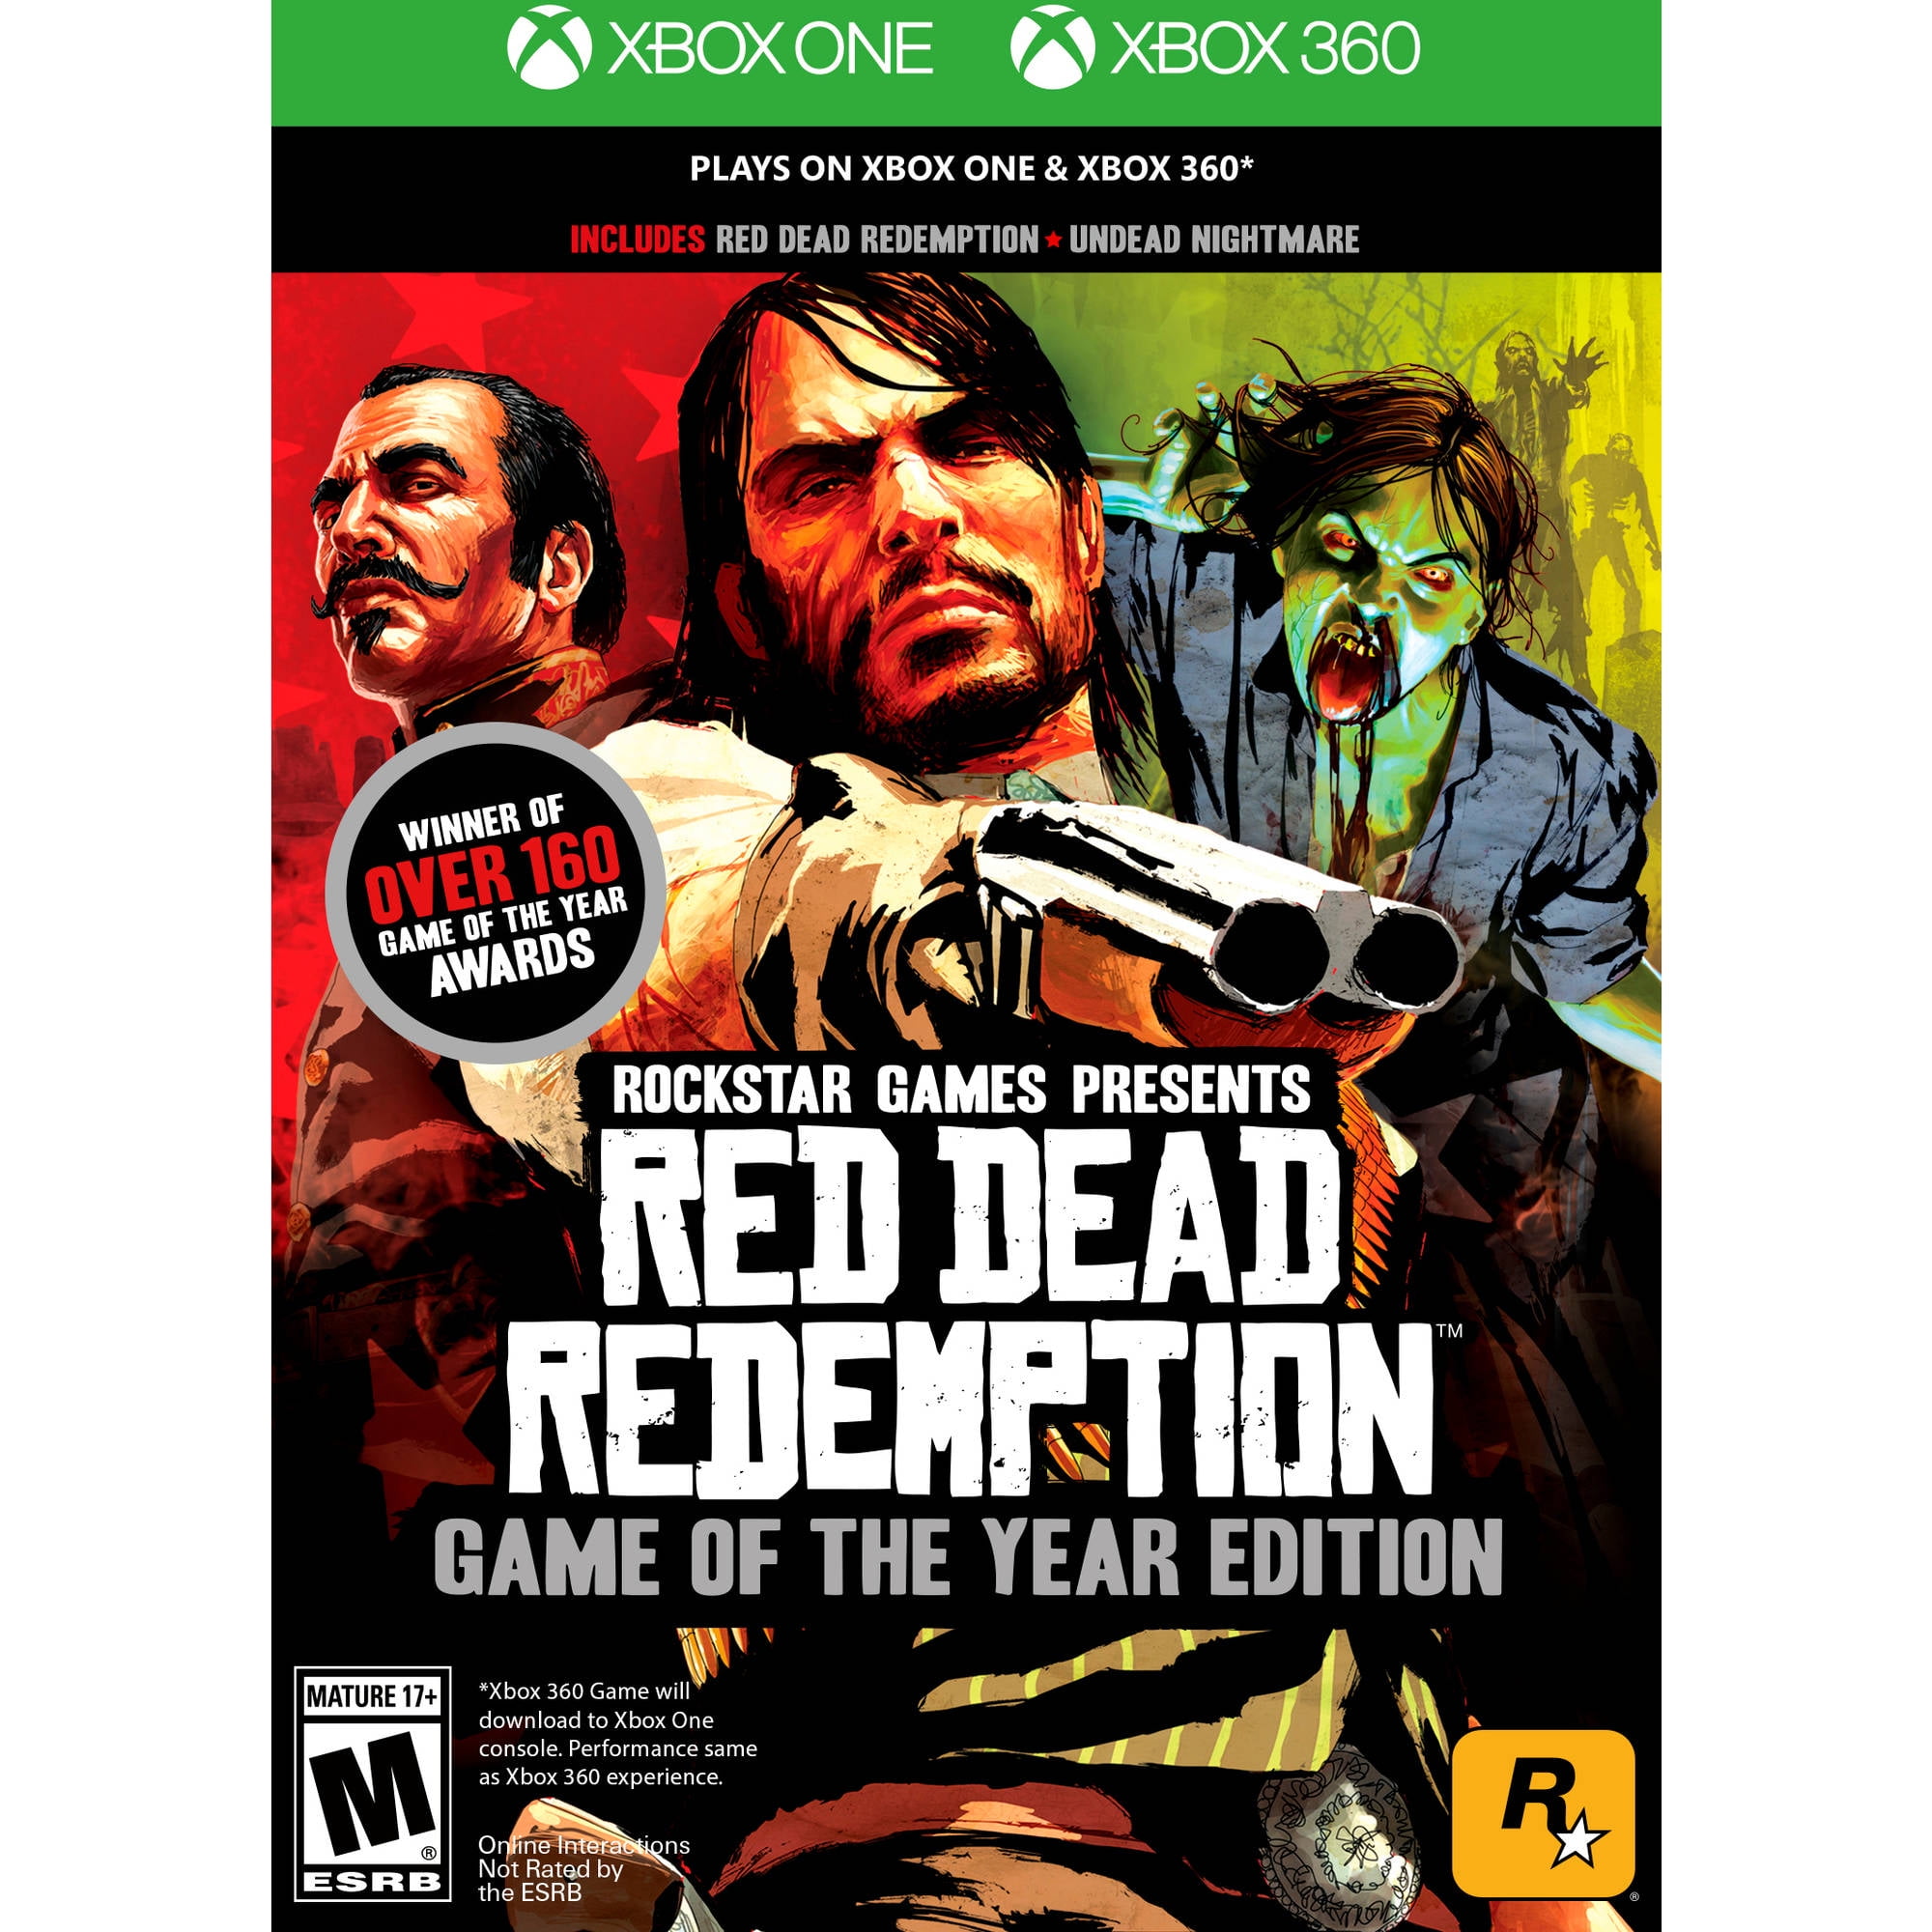 Red Dead Redemption Game Of The Year Edition Rockstar Games